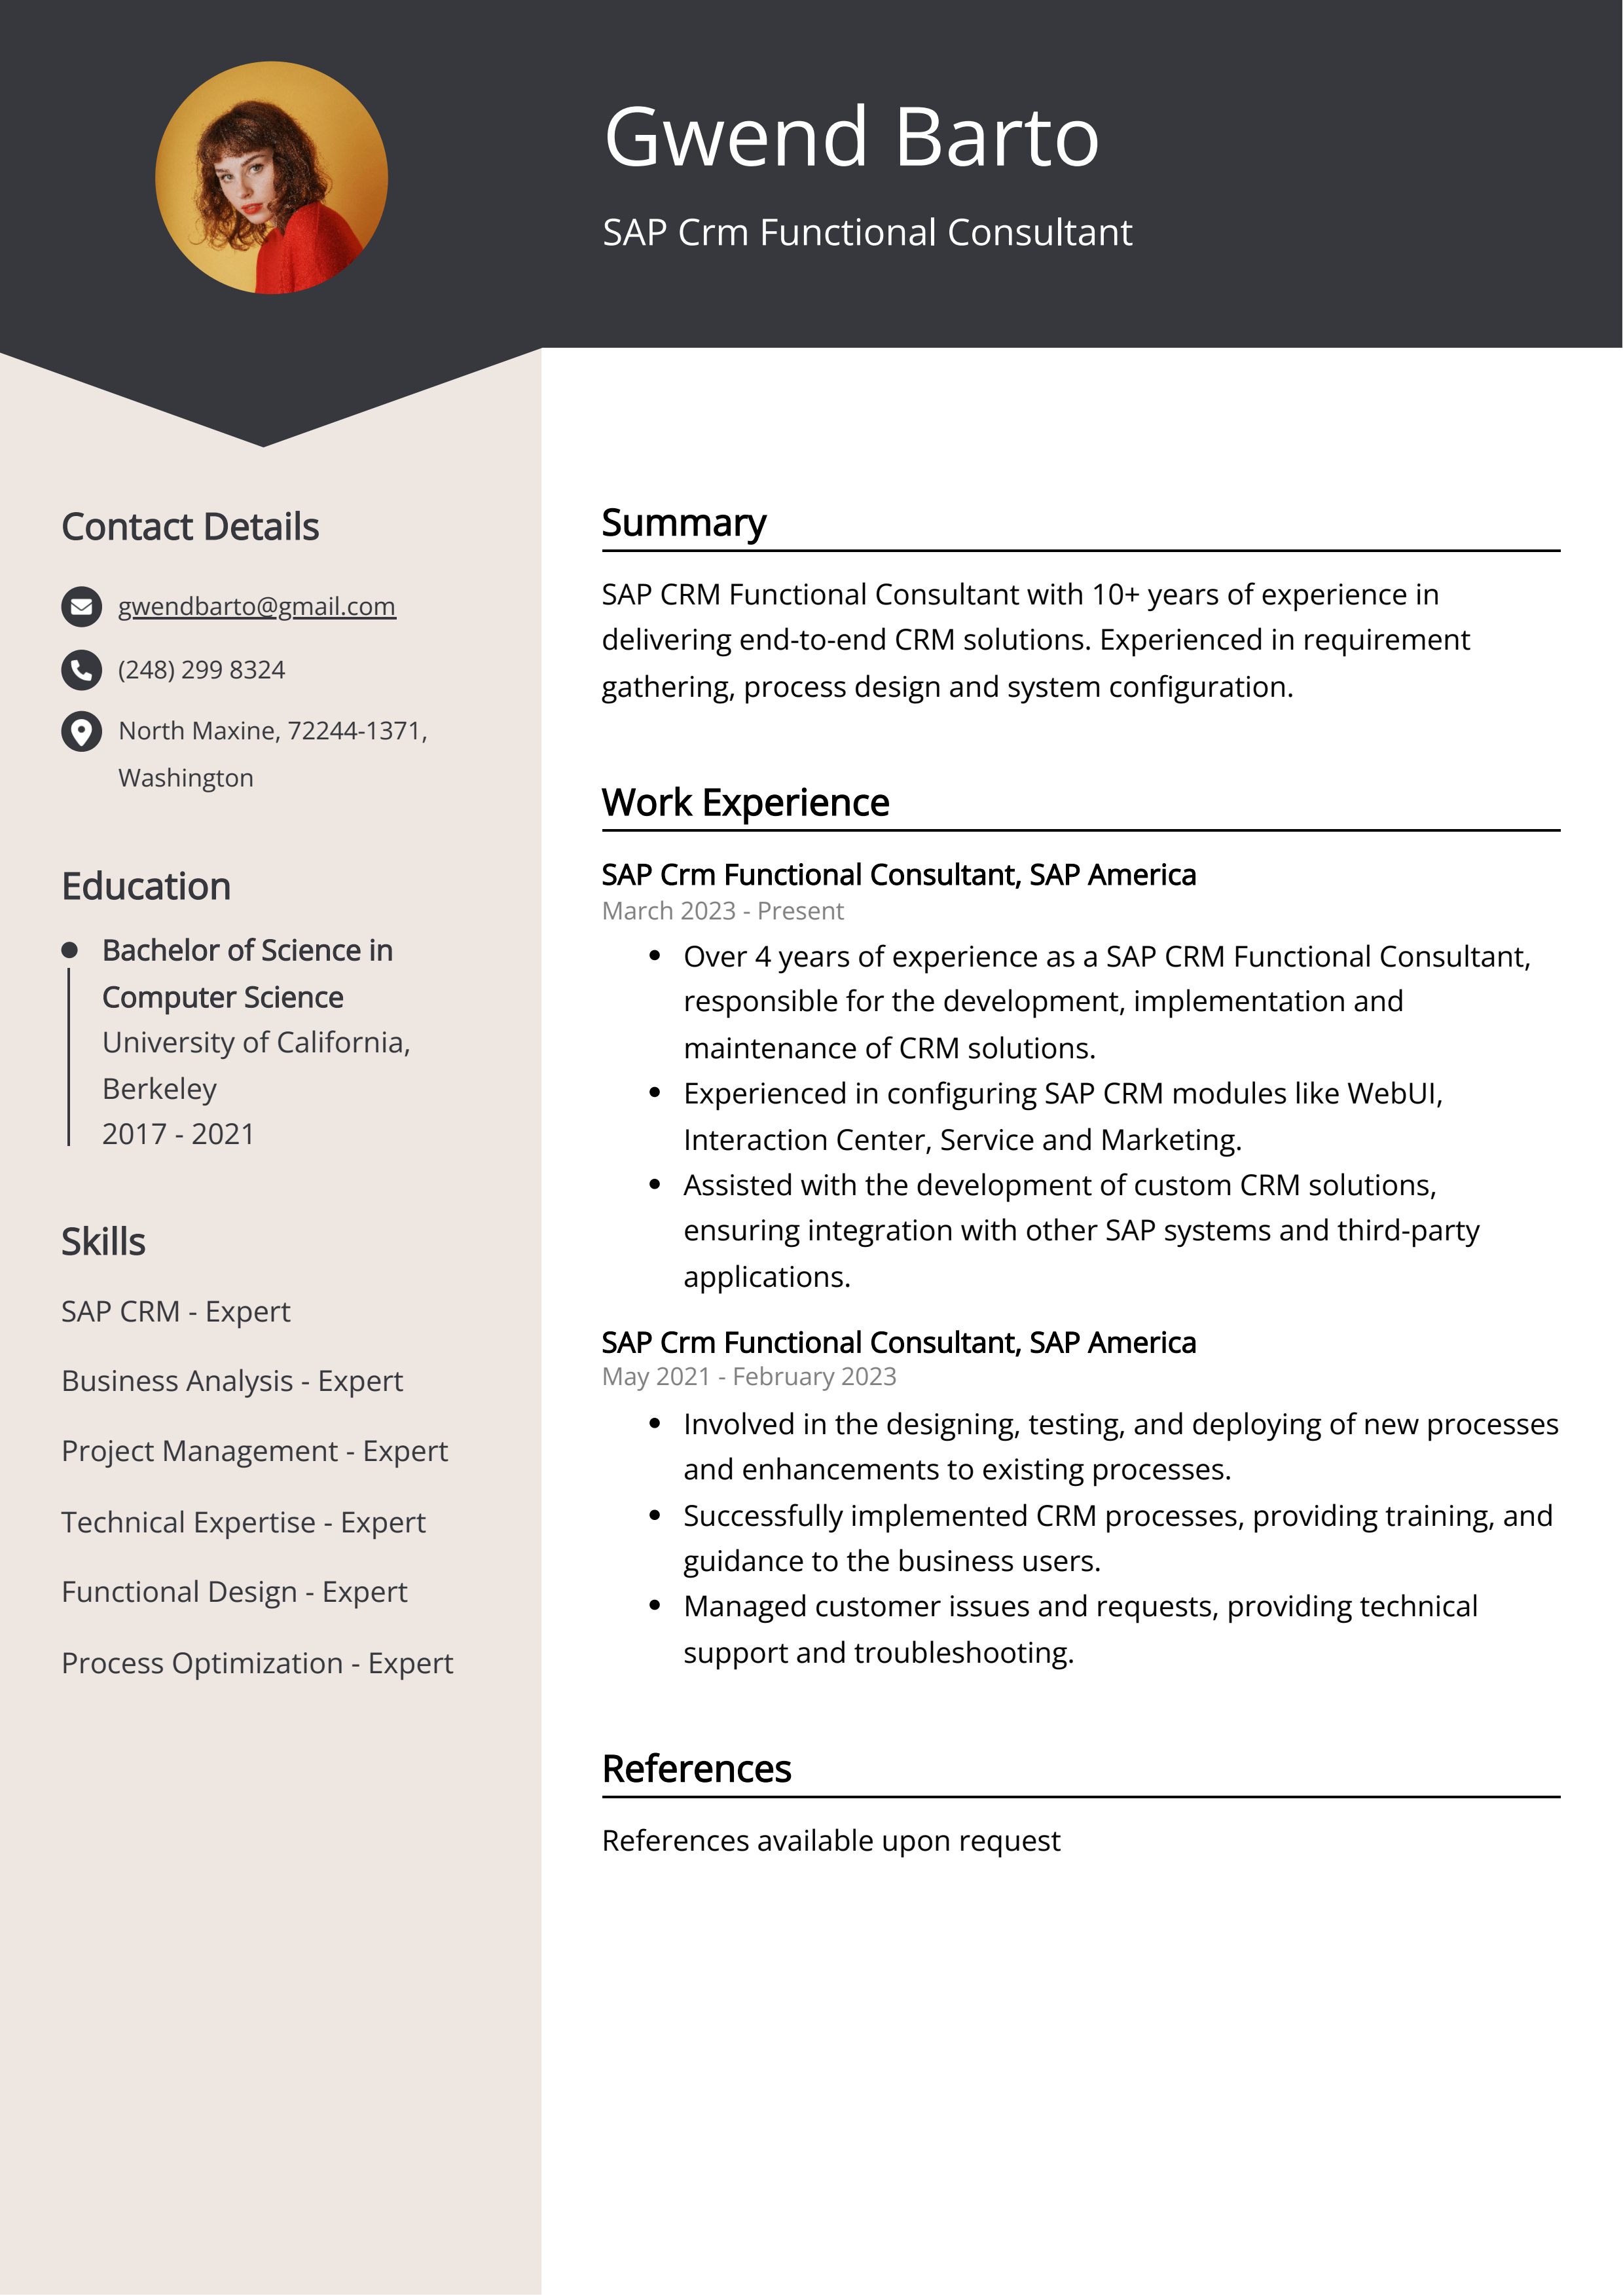 SAP Crm Functional Consultant CV Example